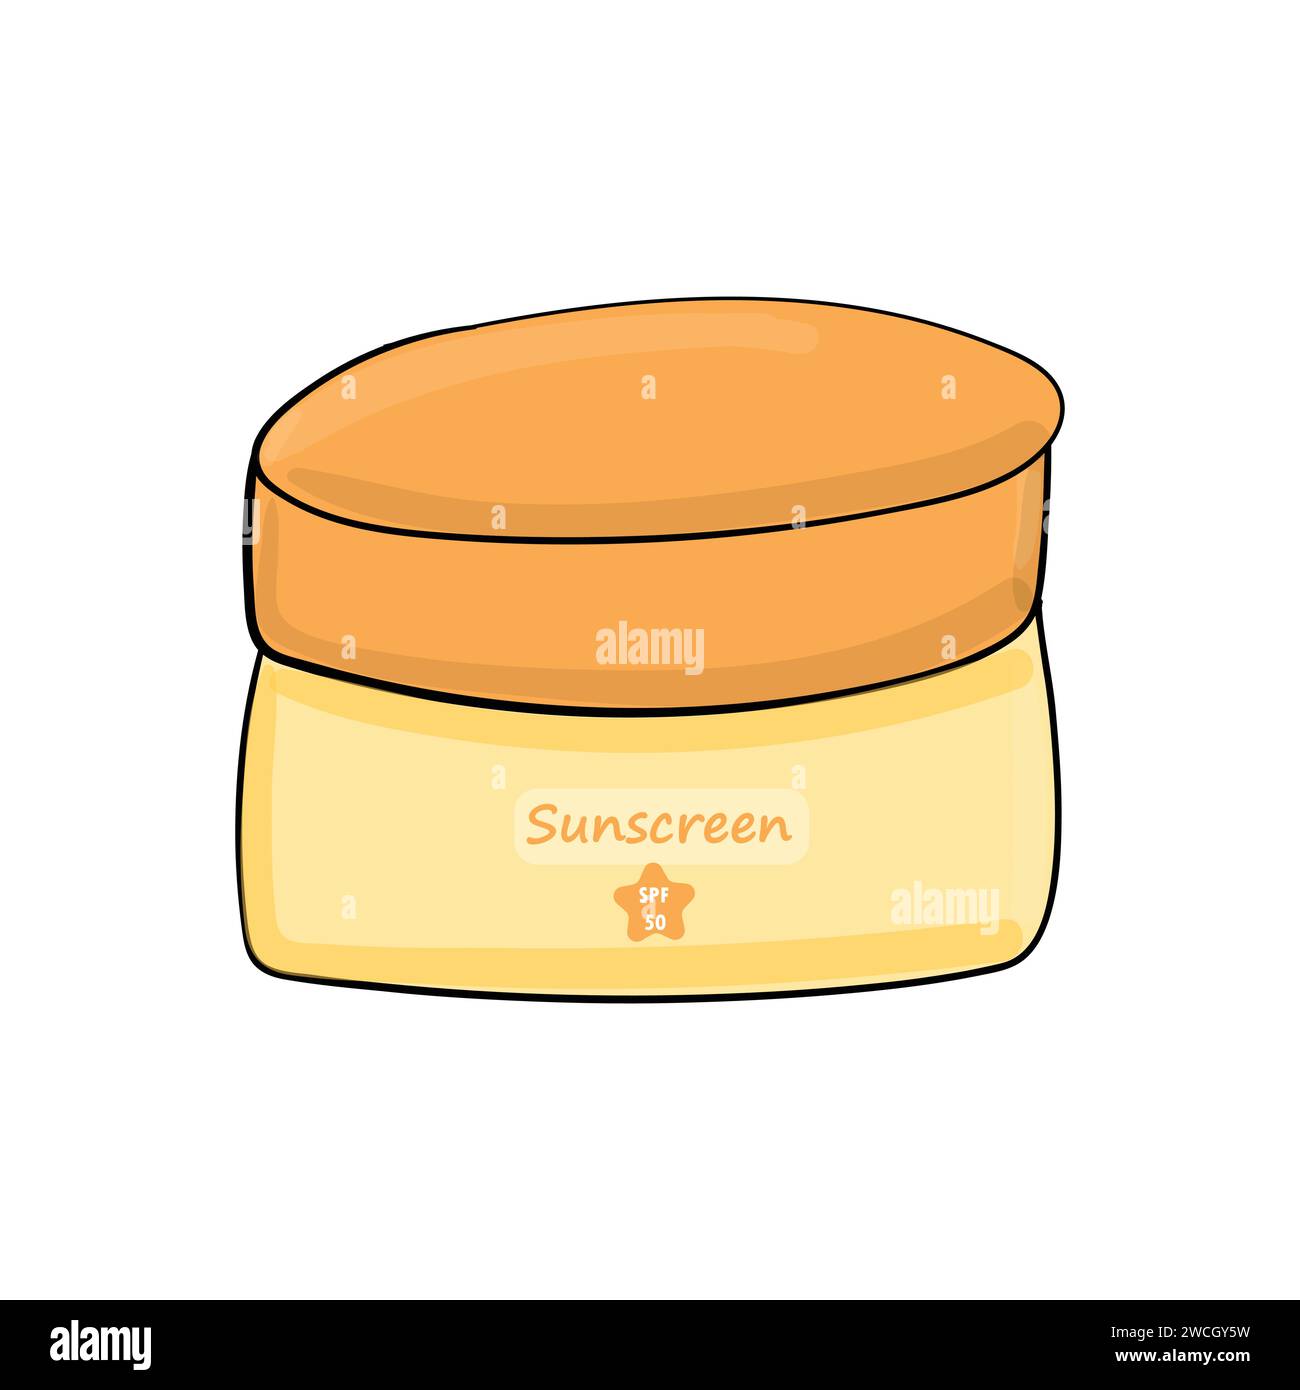 Sunscreen Cute Container Illustration Stock Vector